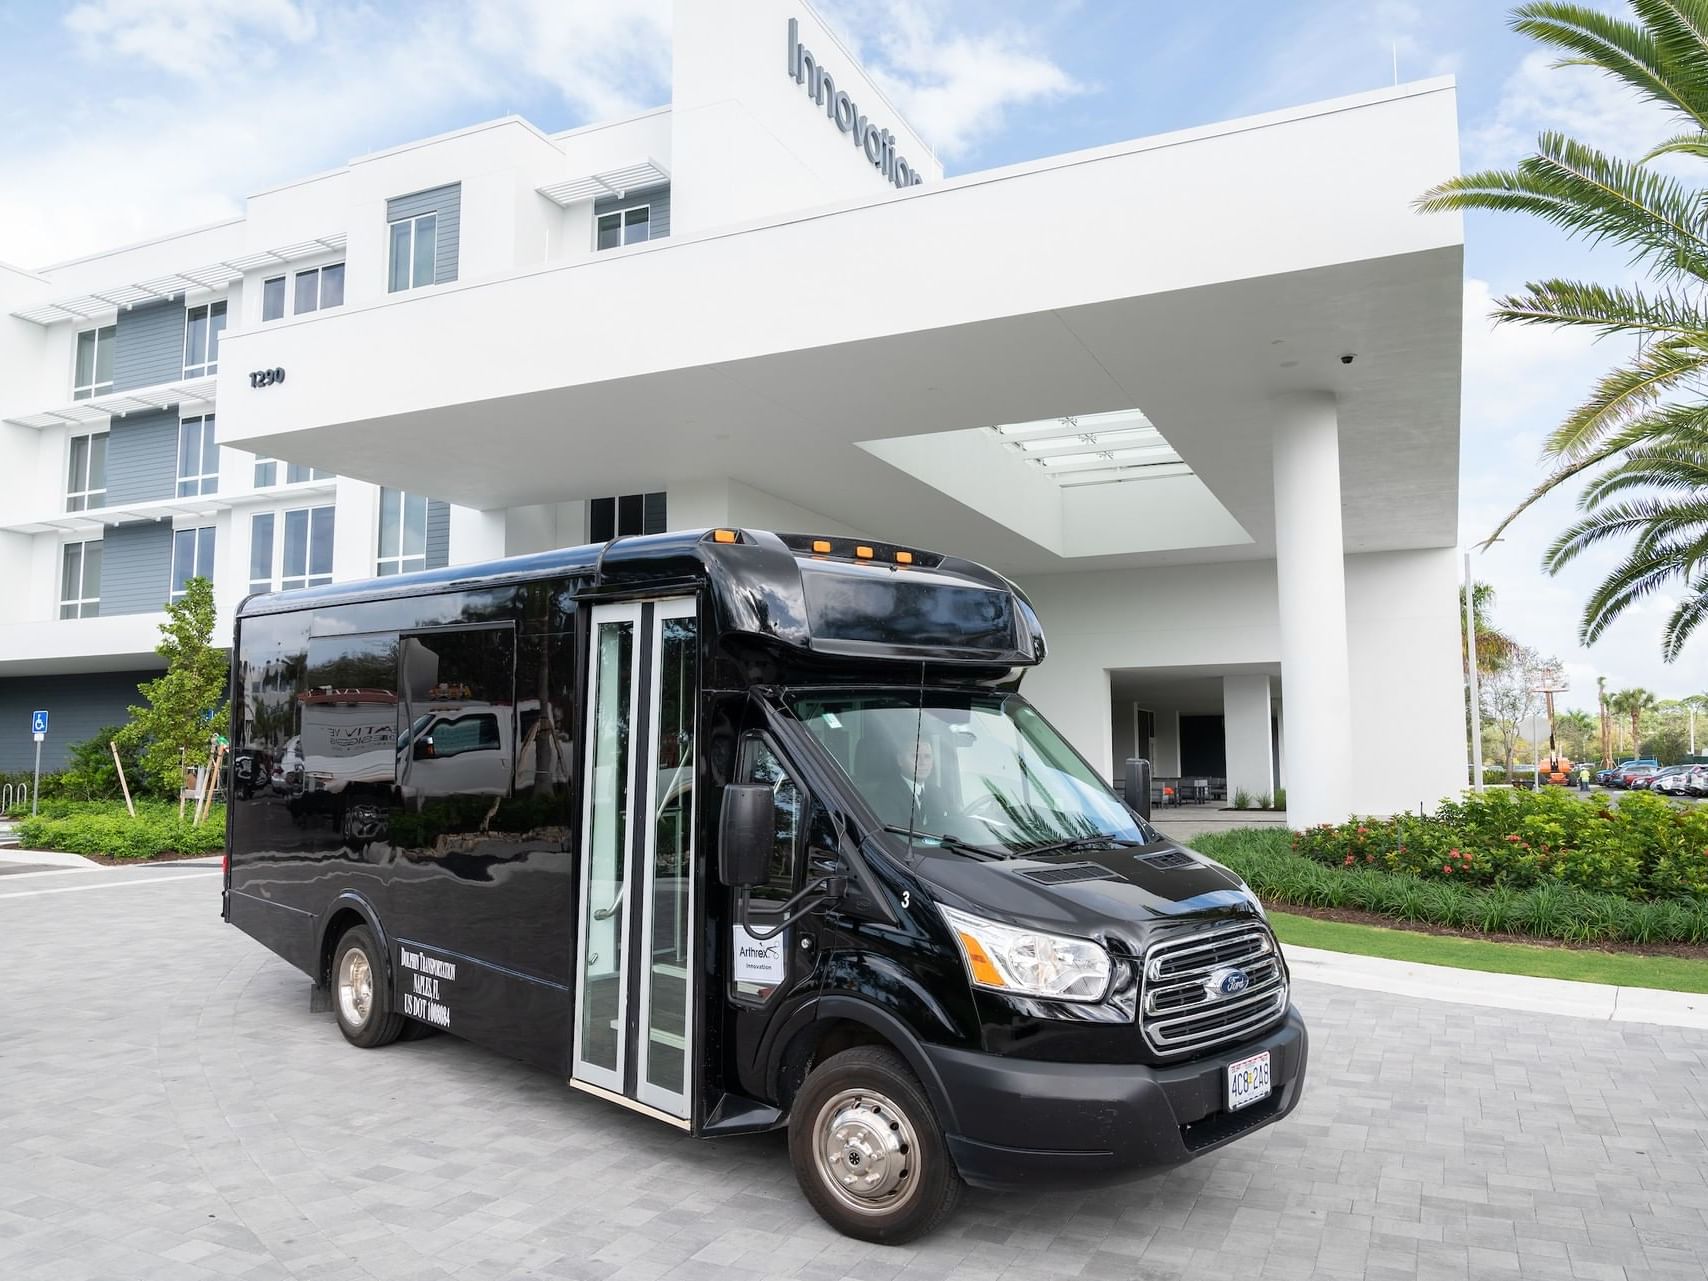 Black Ford Shuttle Bus near the entrance at Innovation Hotel